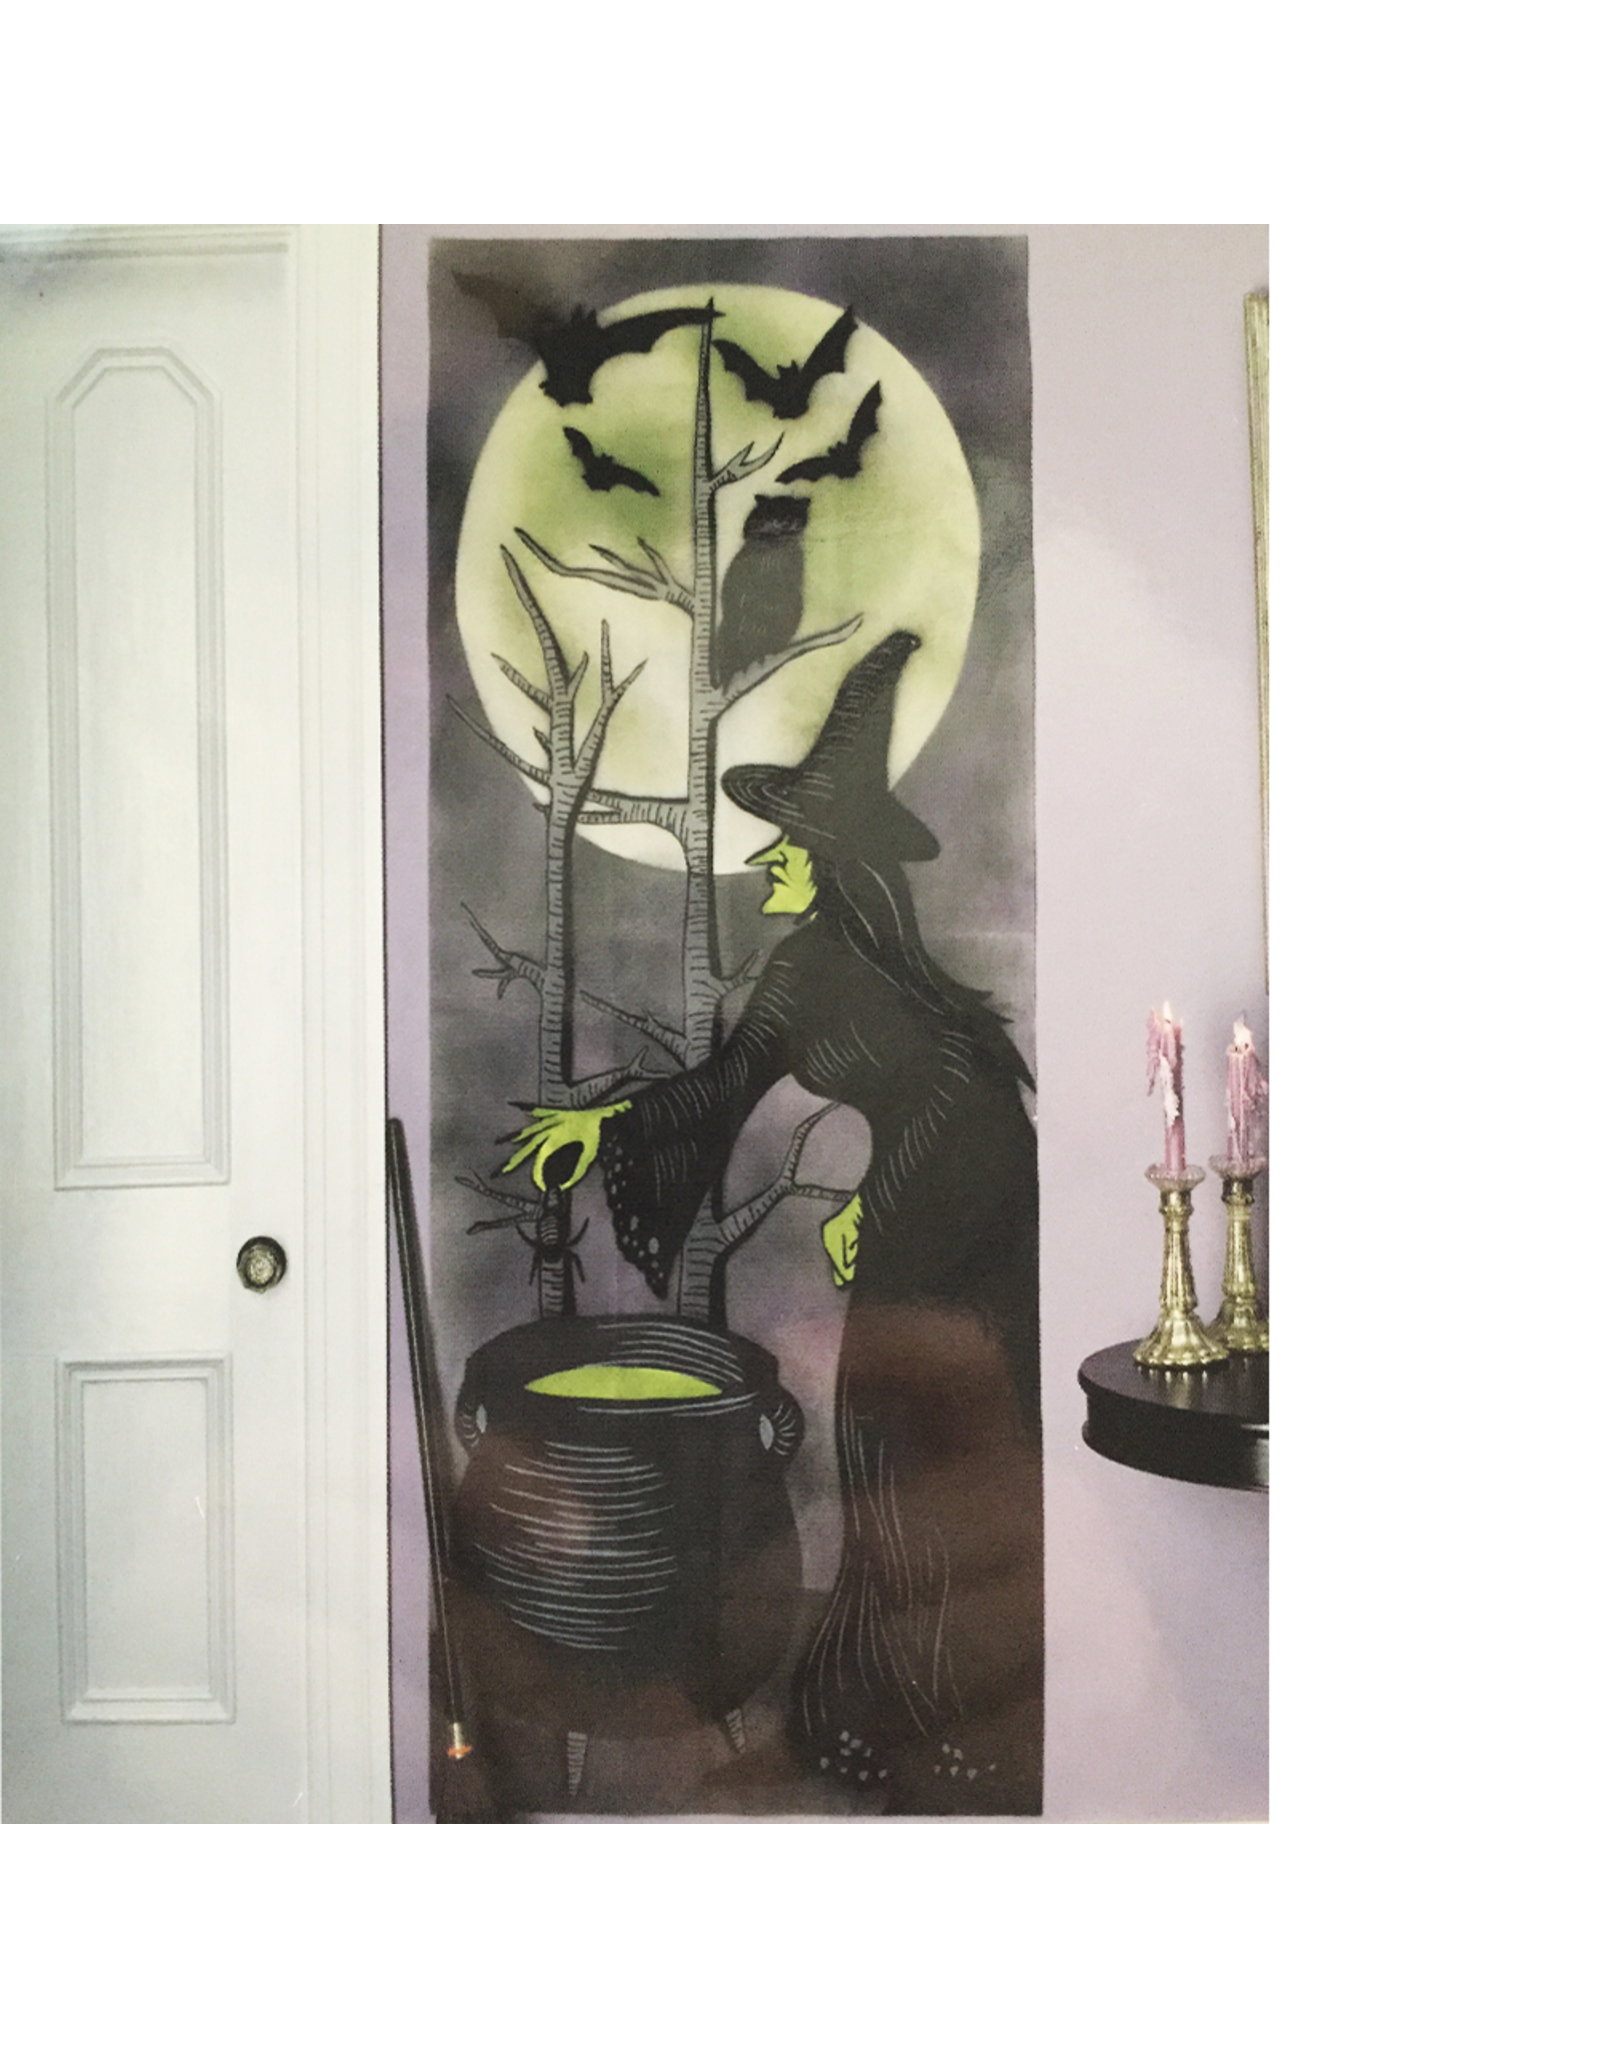 Darice Halloween Wall Mural Hanging Decoration Witch W Caldron 68x12